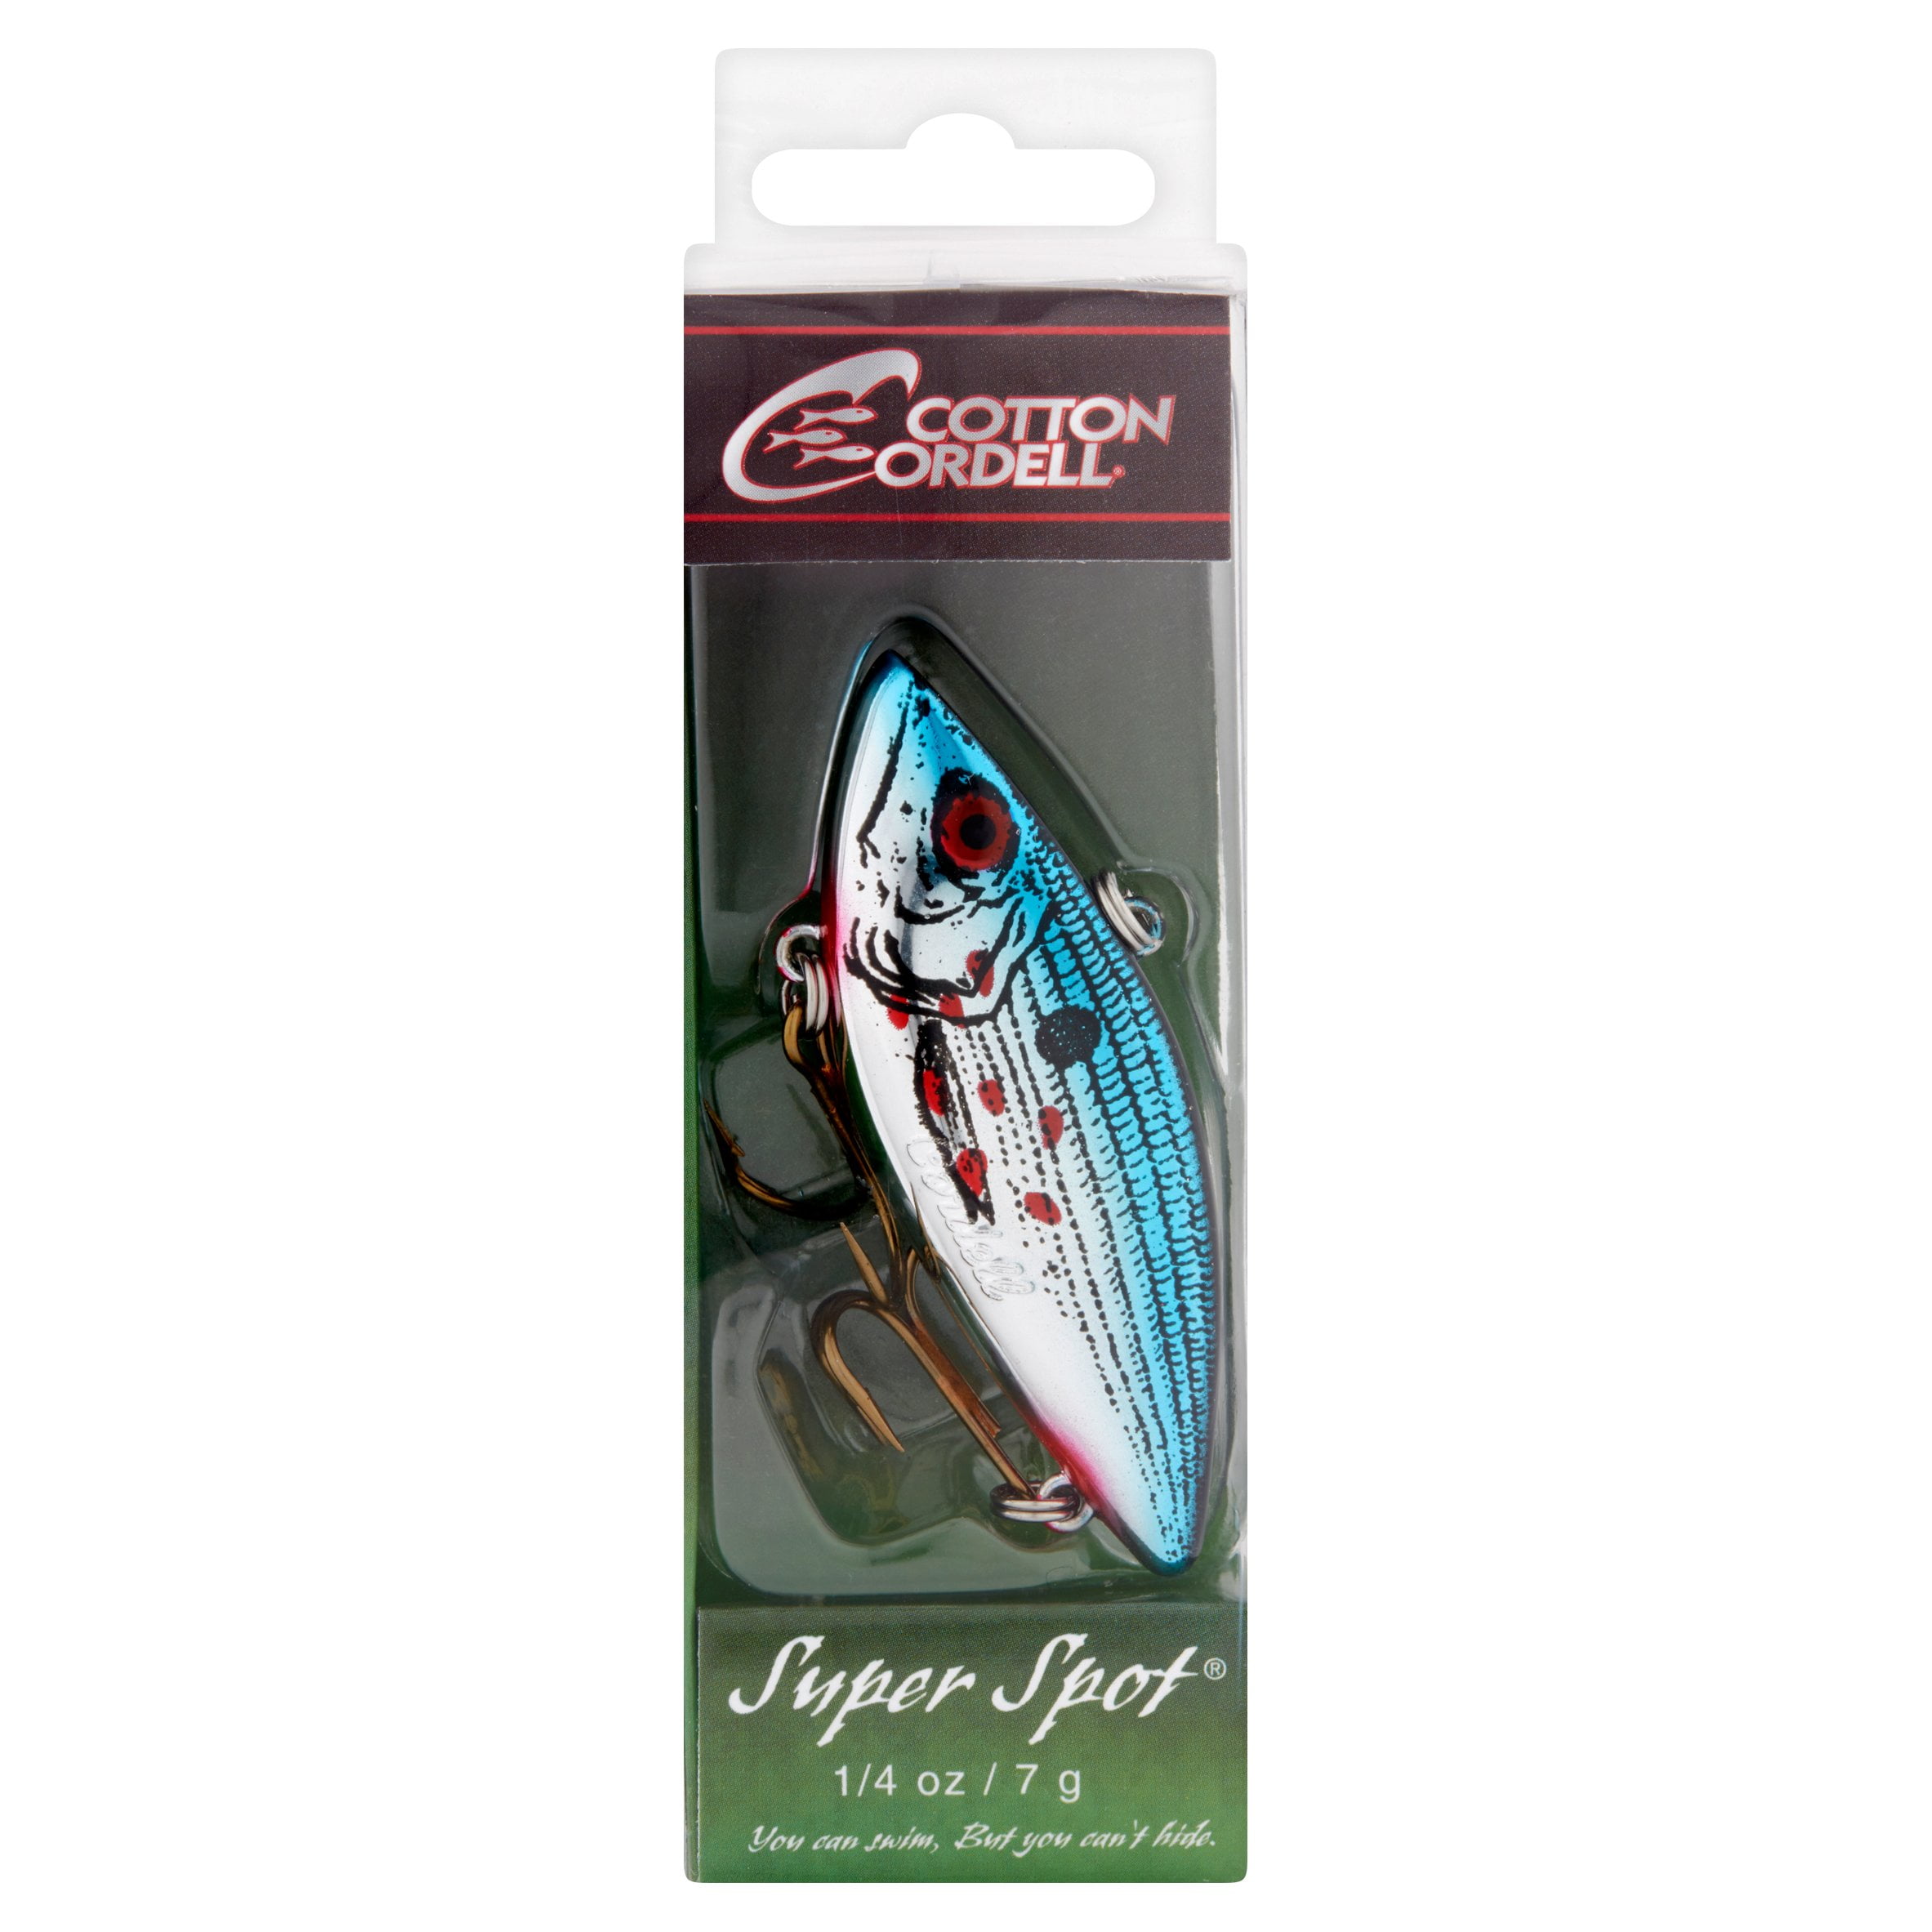  LURESMEOW Lipless Crankbait, Rattle Trap Fishing Lures for  Freshwater Saltwater, Lipless Crankbaits for Bass Fishing Lure Set for Bass  Trout Walleye Redfish Pike, 5pcs with Box… : Sports & Outdoors